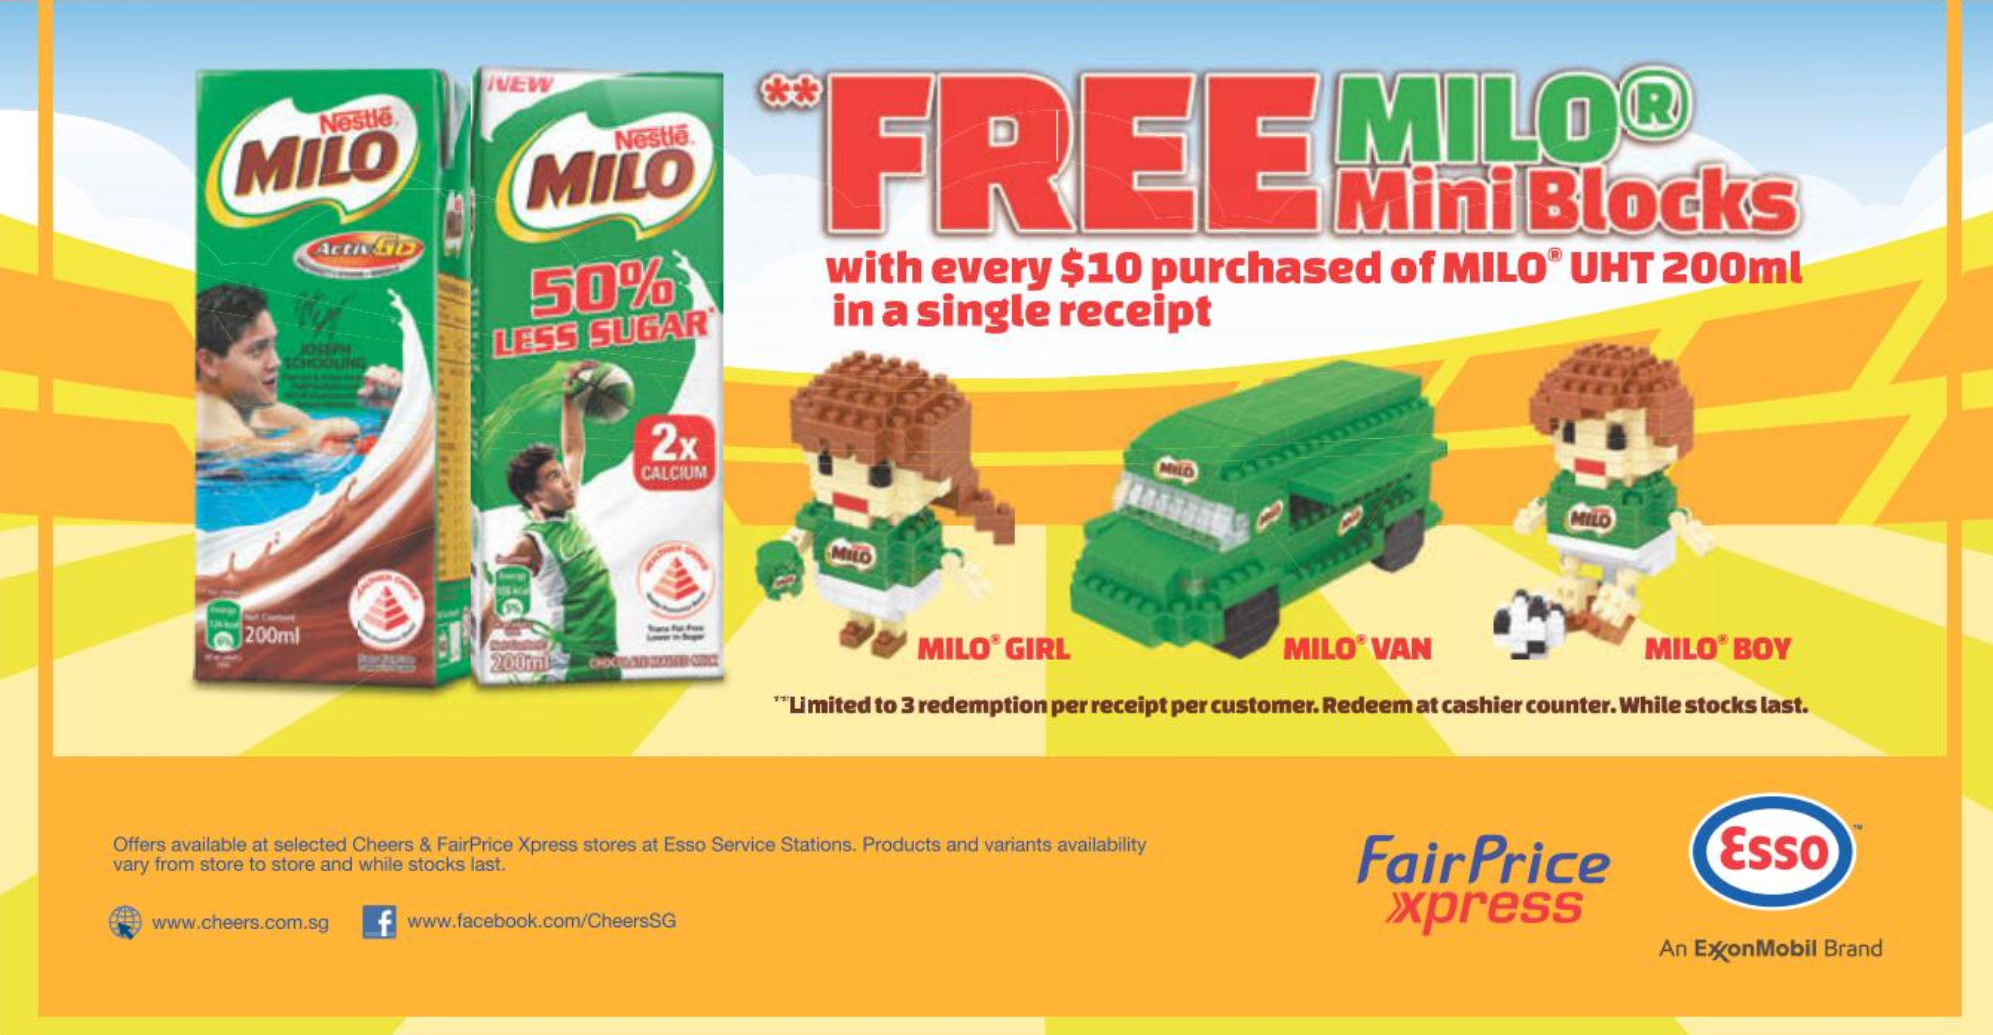 You can now get free MILO Mini Blocks with every $10 purchased of MILO UHT 200ml - 1